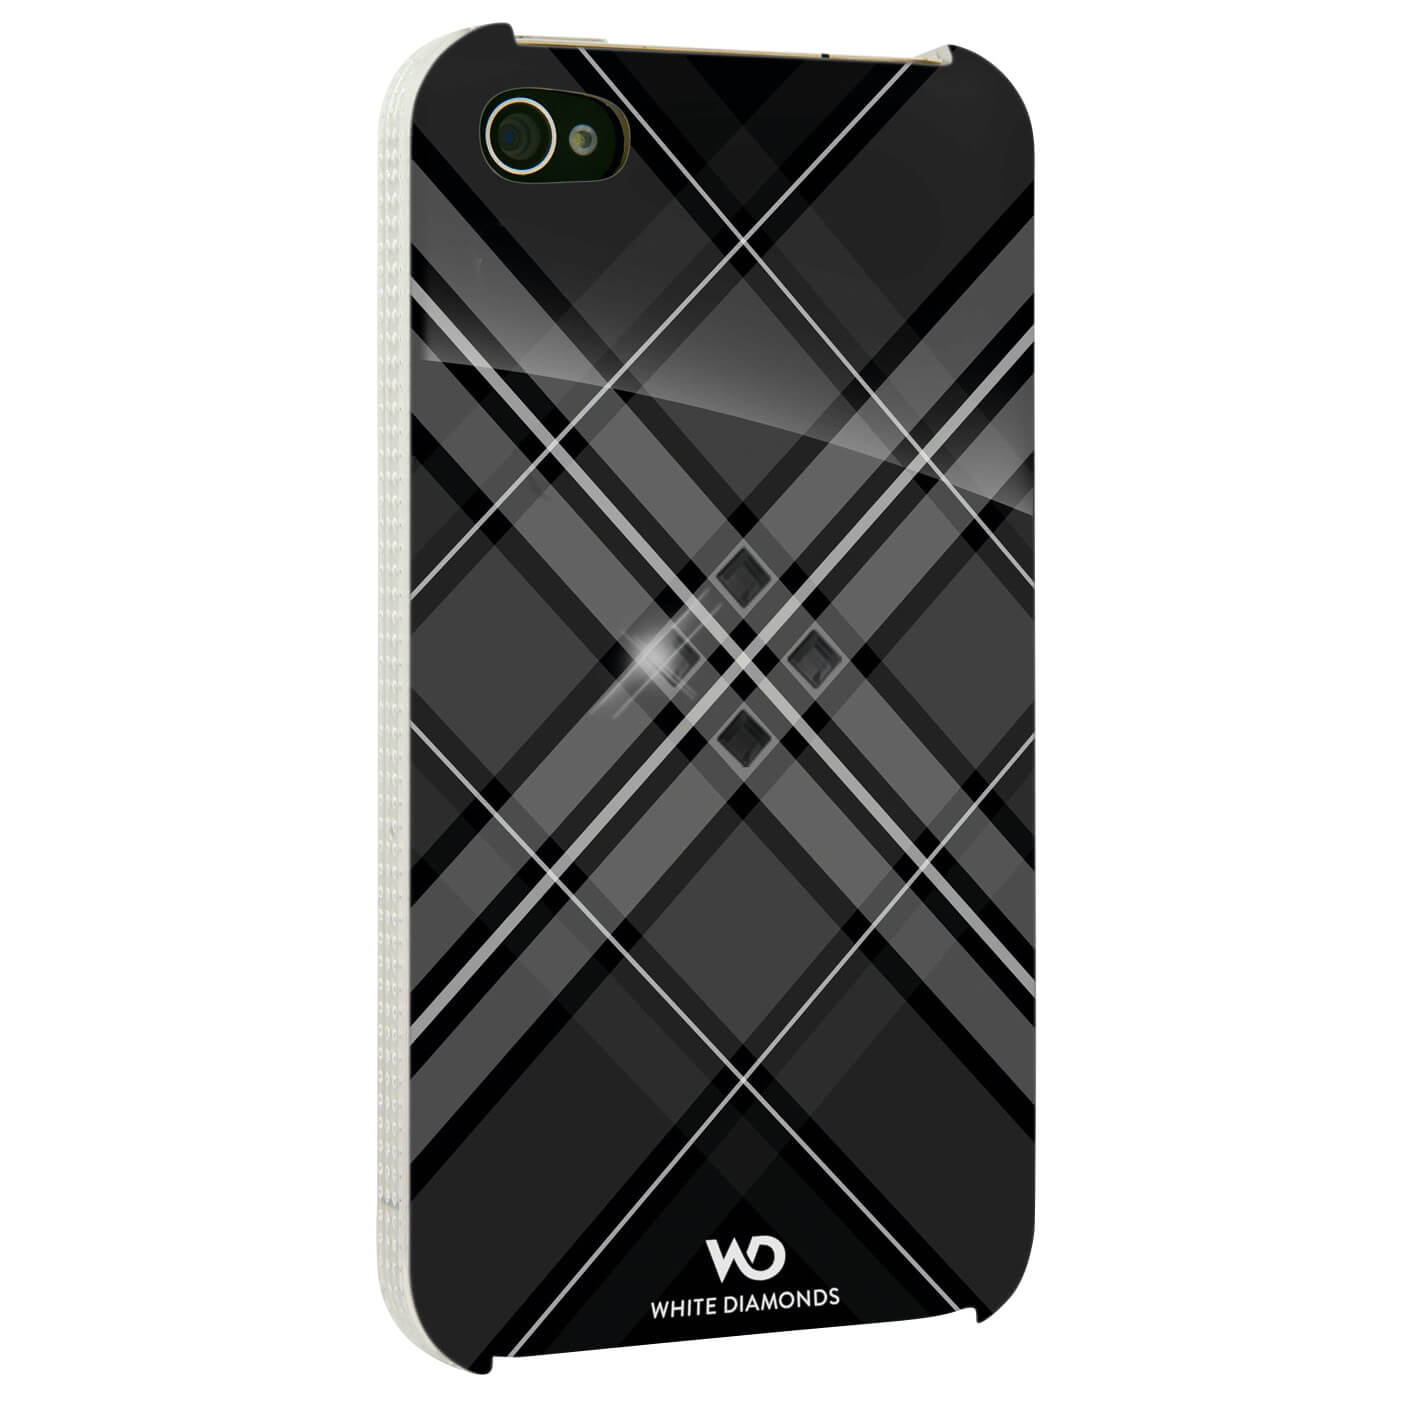 Grid Mobile Phone Cover for A pple iPhone 4/4S, black